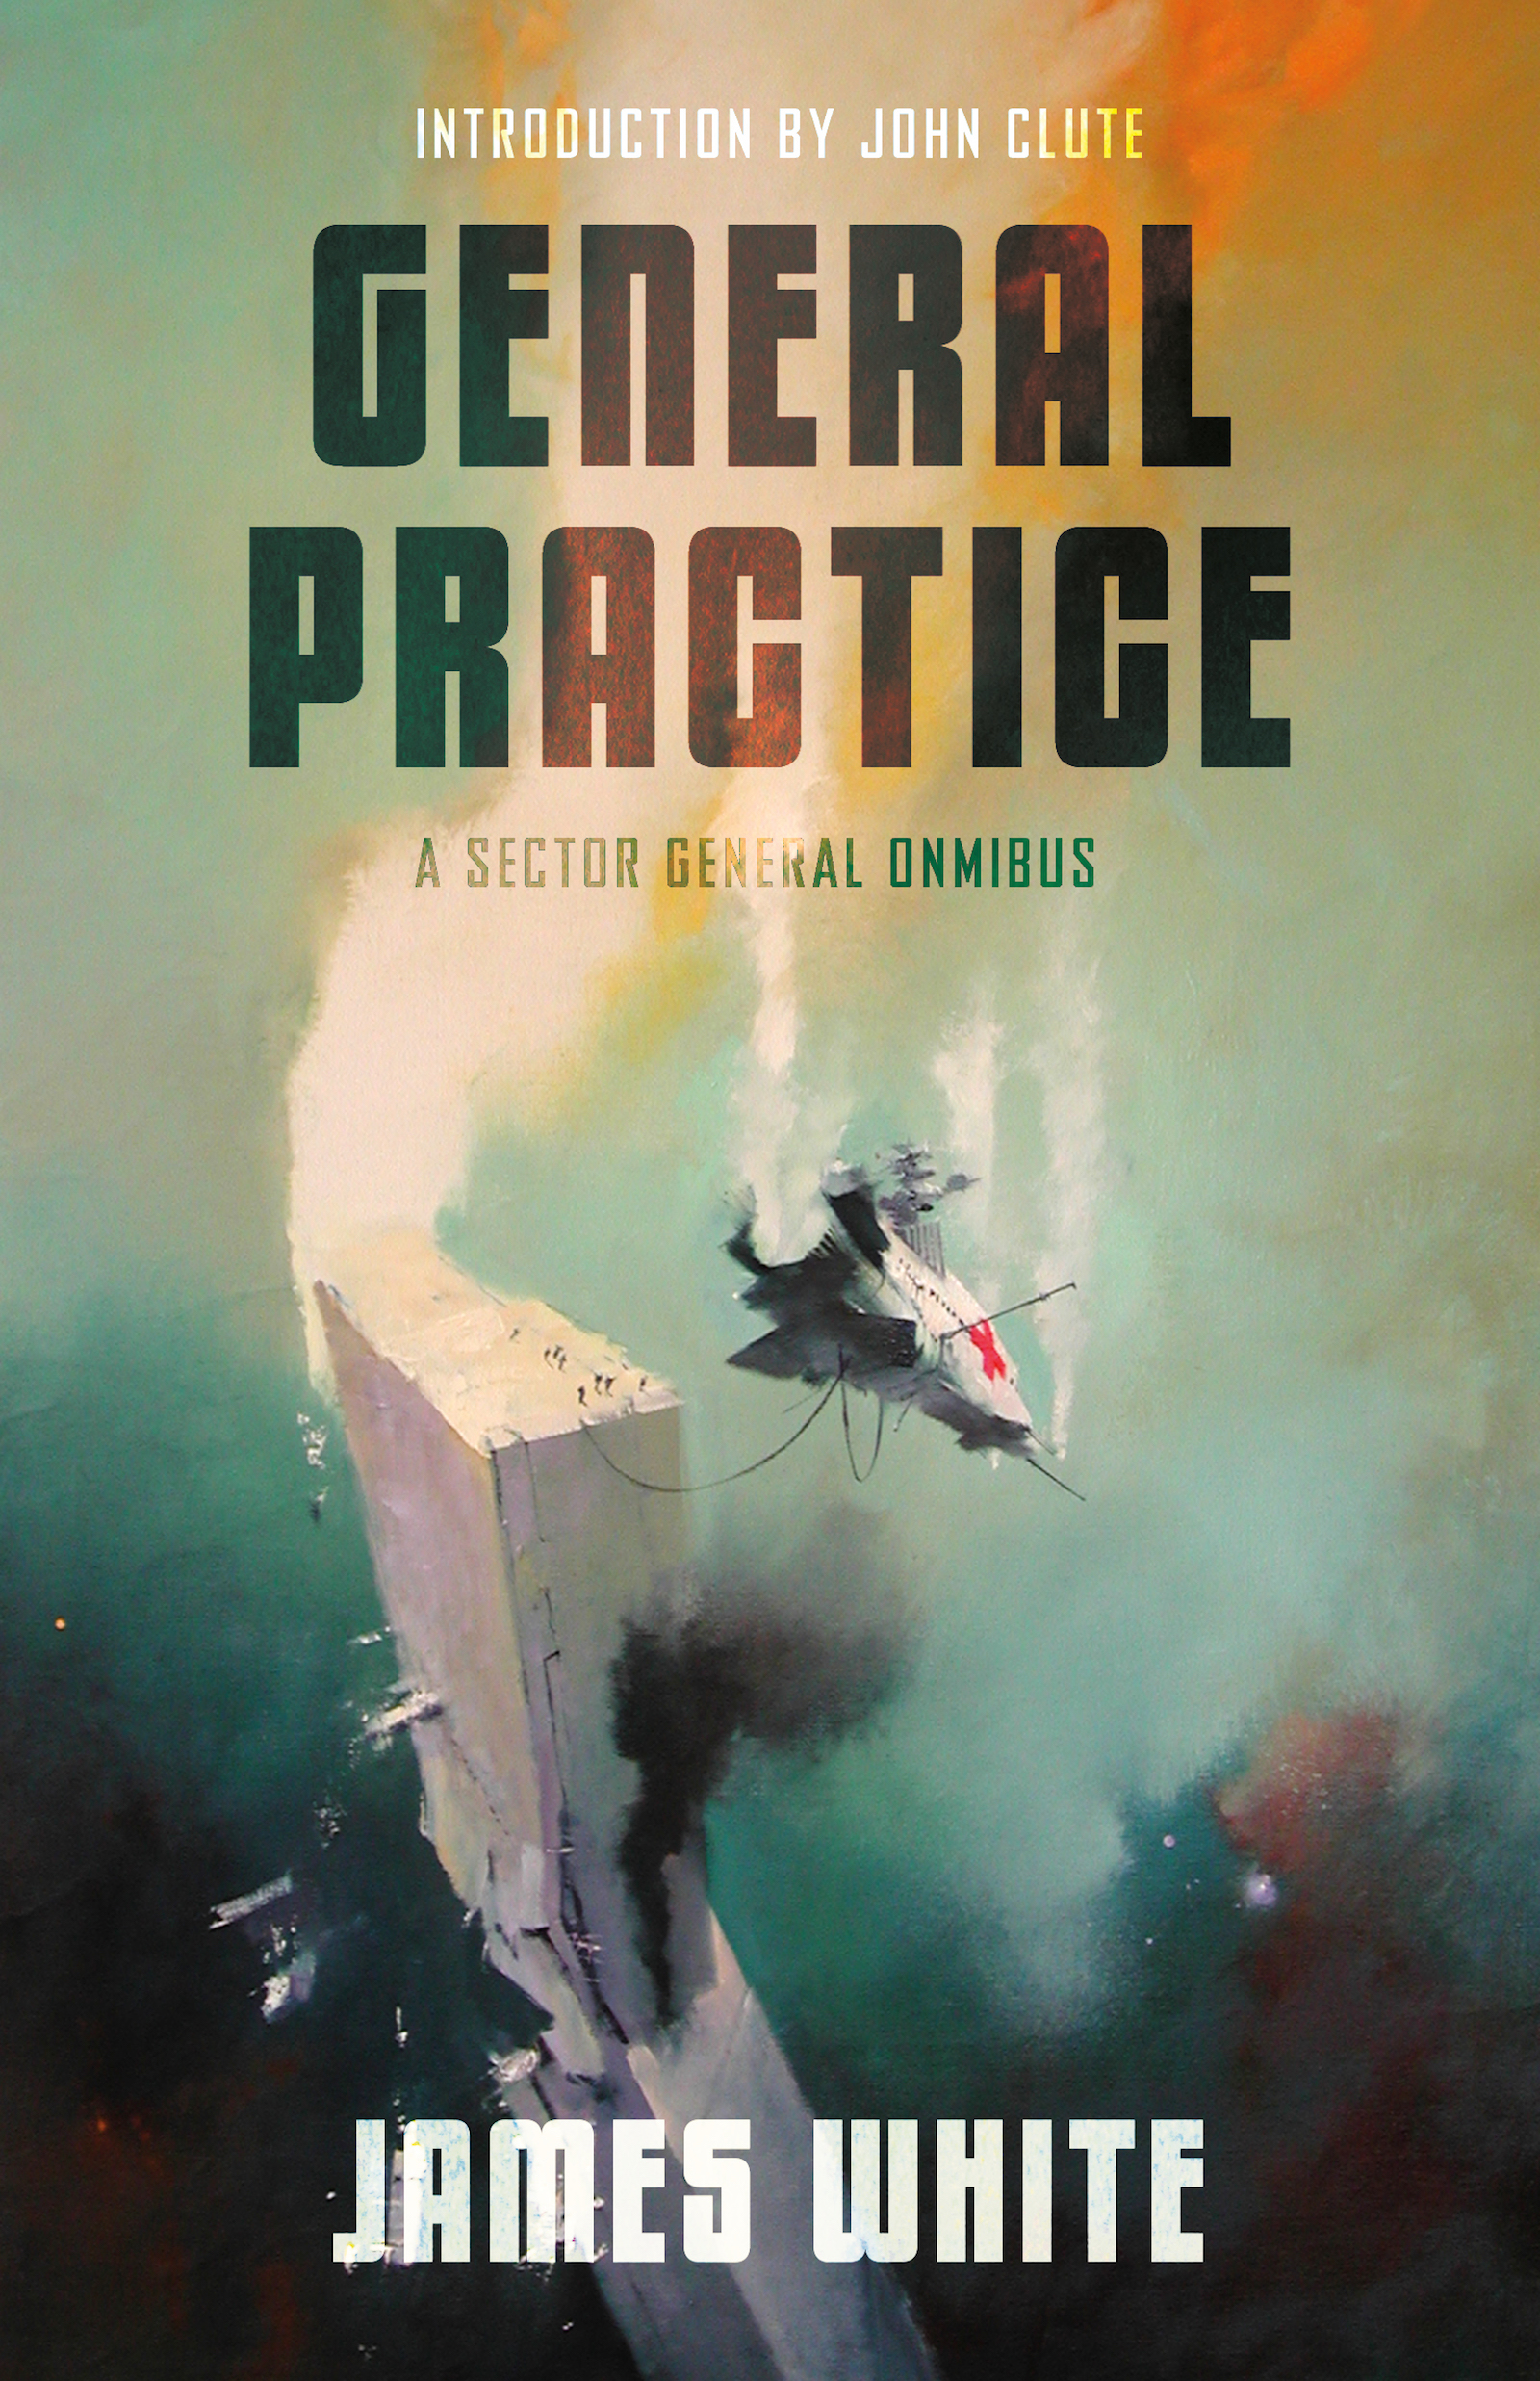 General Practice : A Sector General Omnibus by James White